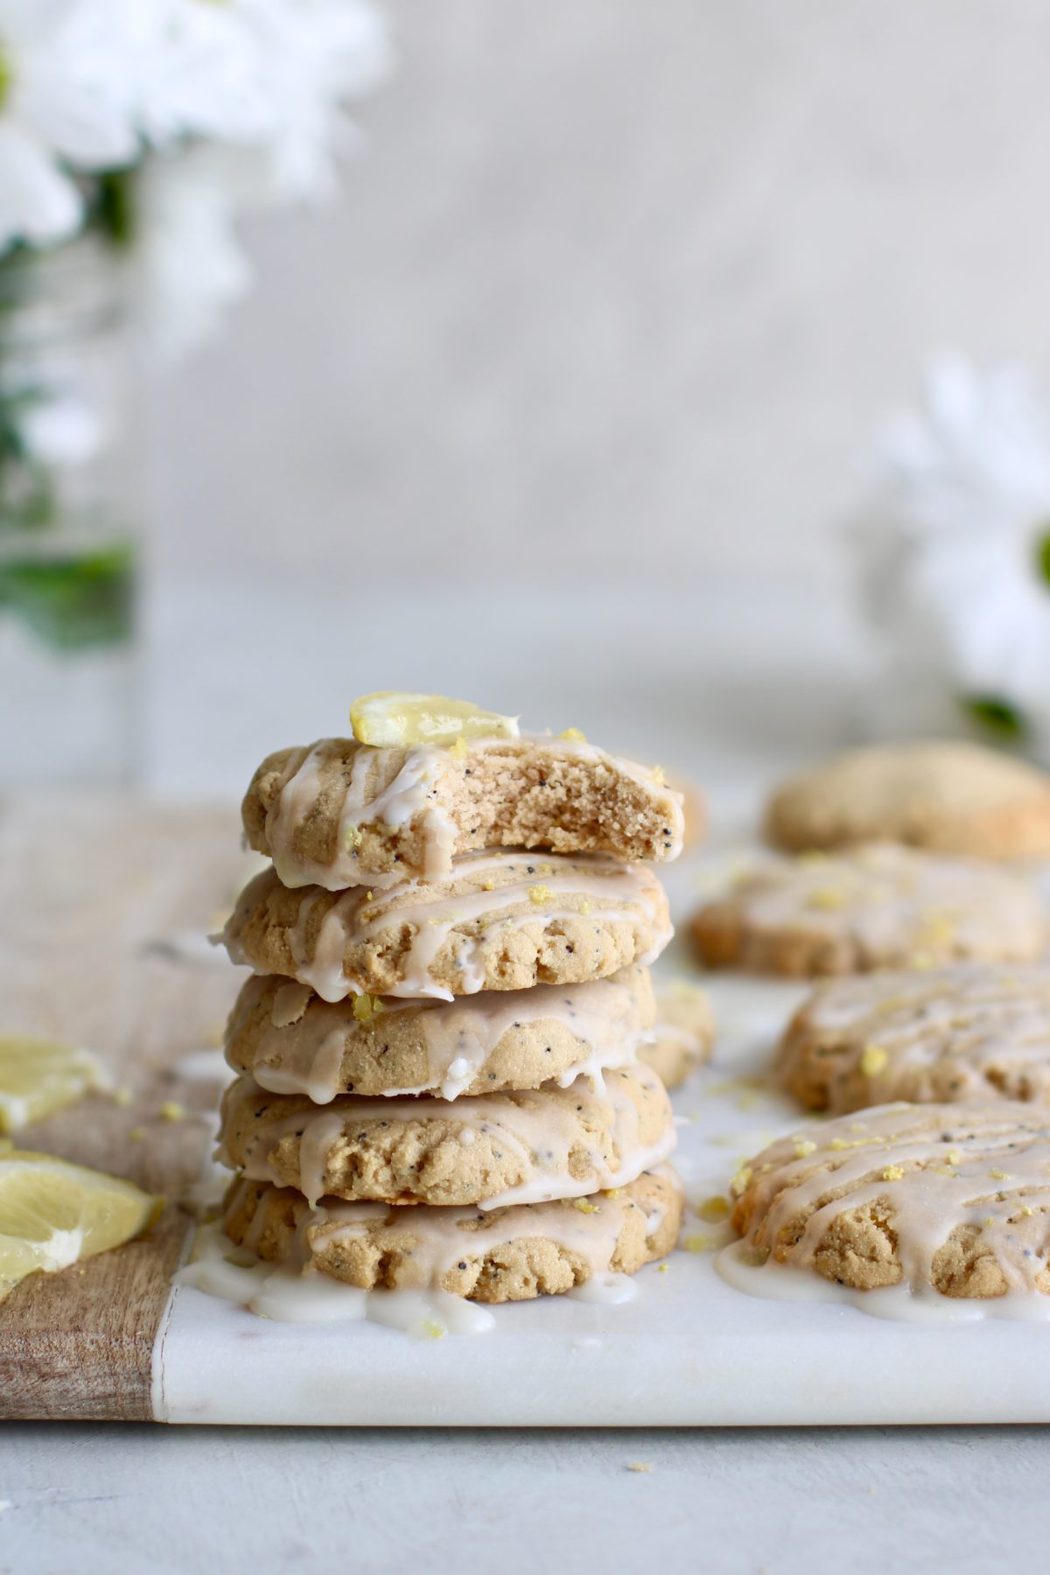 Photo of a stack of five Paleo Lemon Poppy Seed Cookies drizzled with a glaze. The top cookie has a perfect bite out of it.